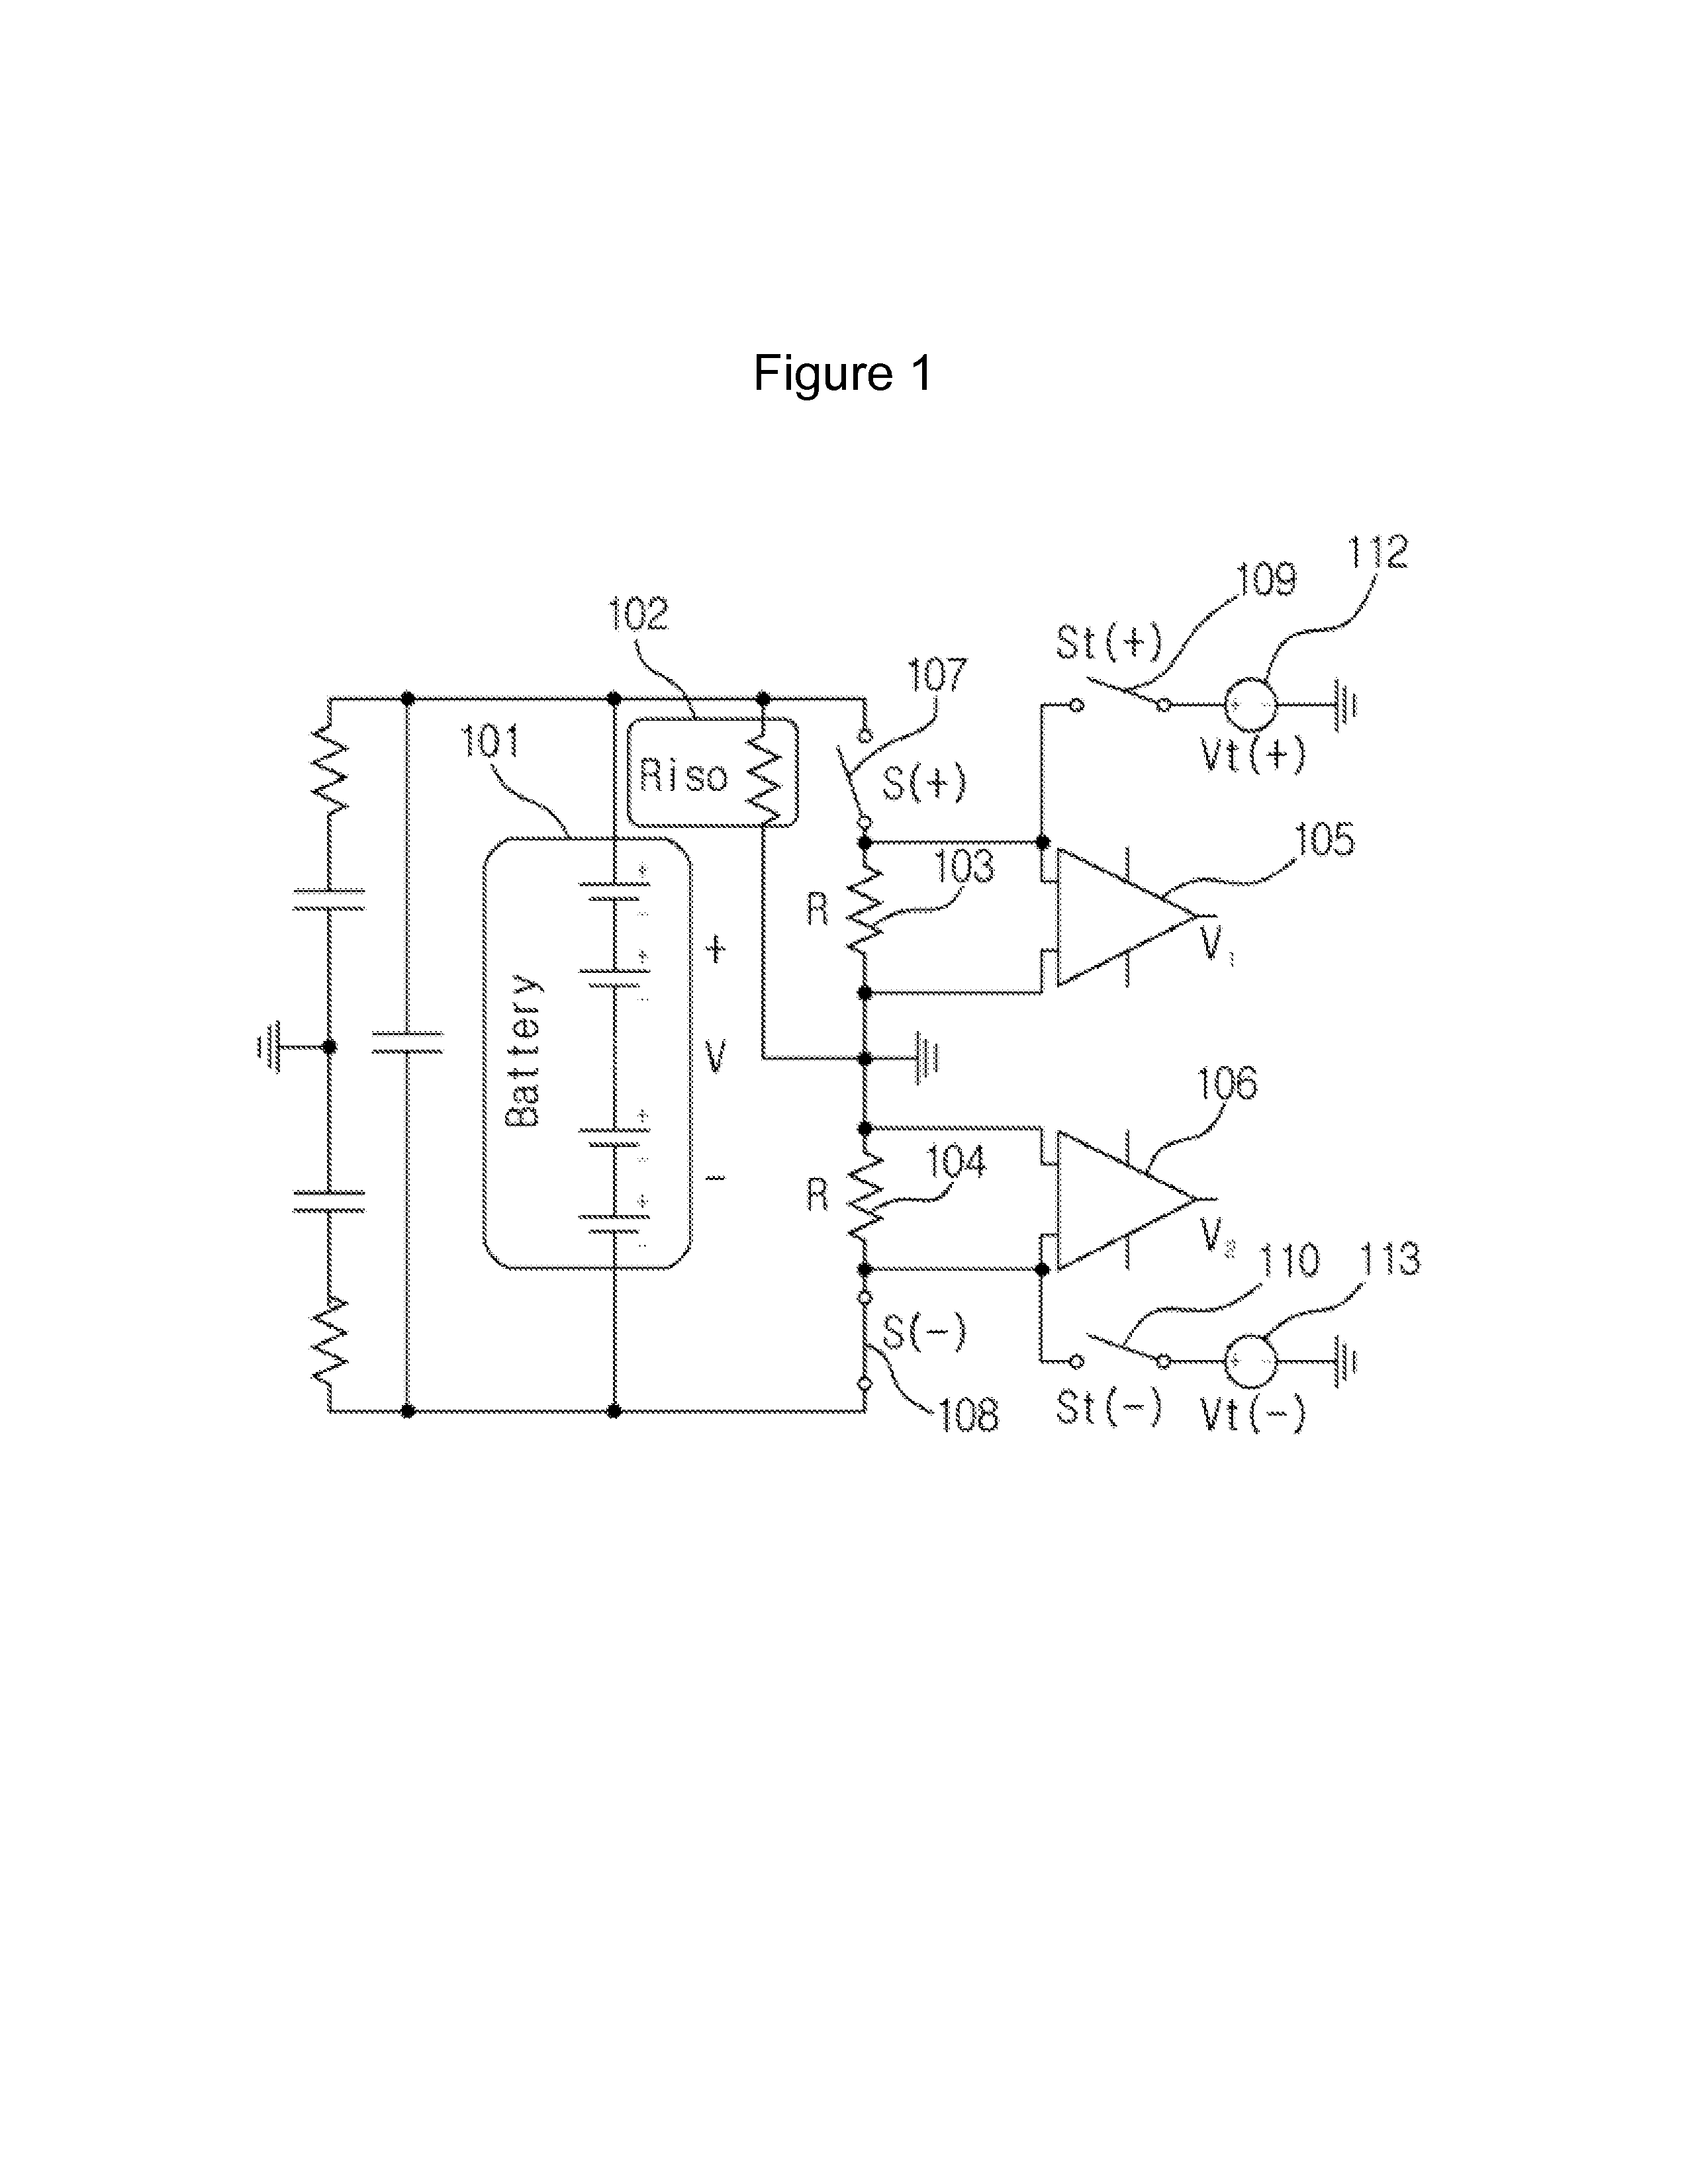 Insulation resistance measurement circuit having self-test function without generating leakage current